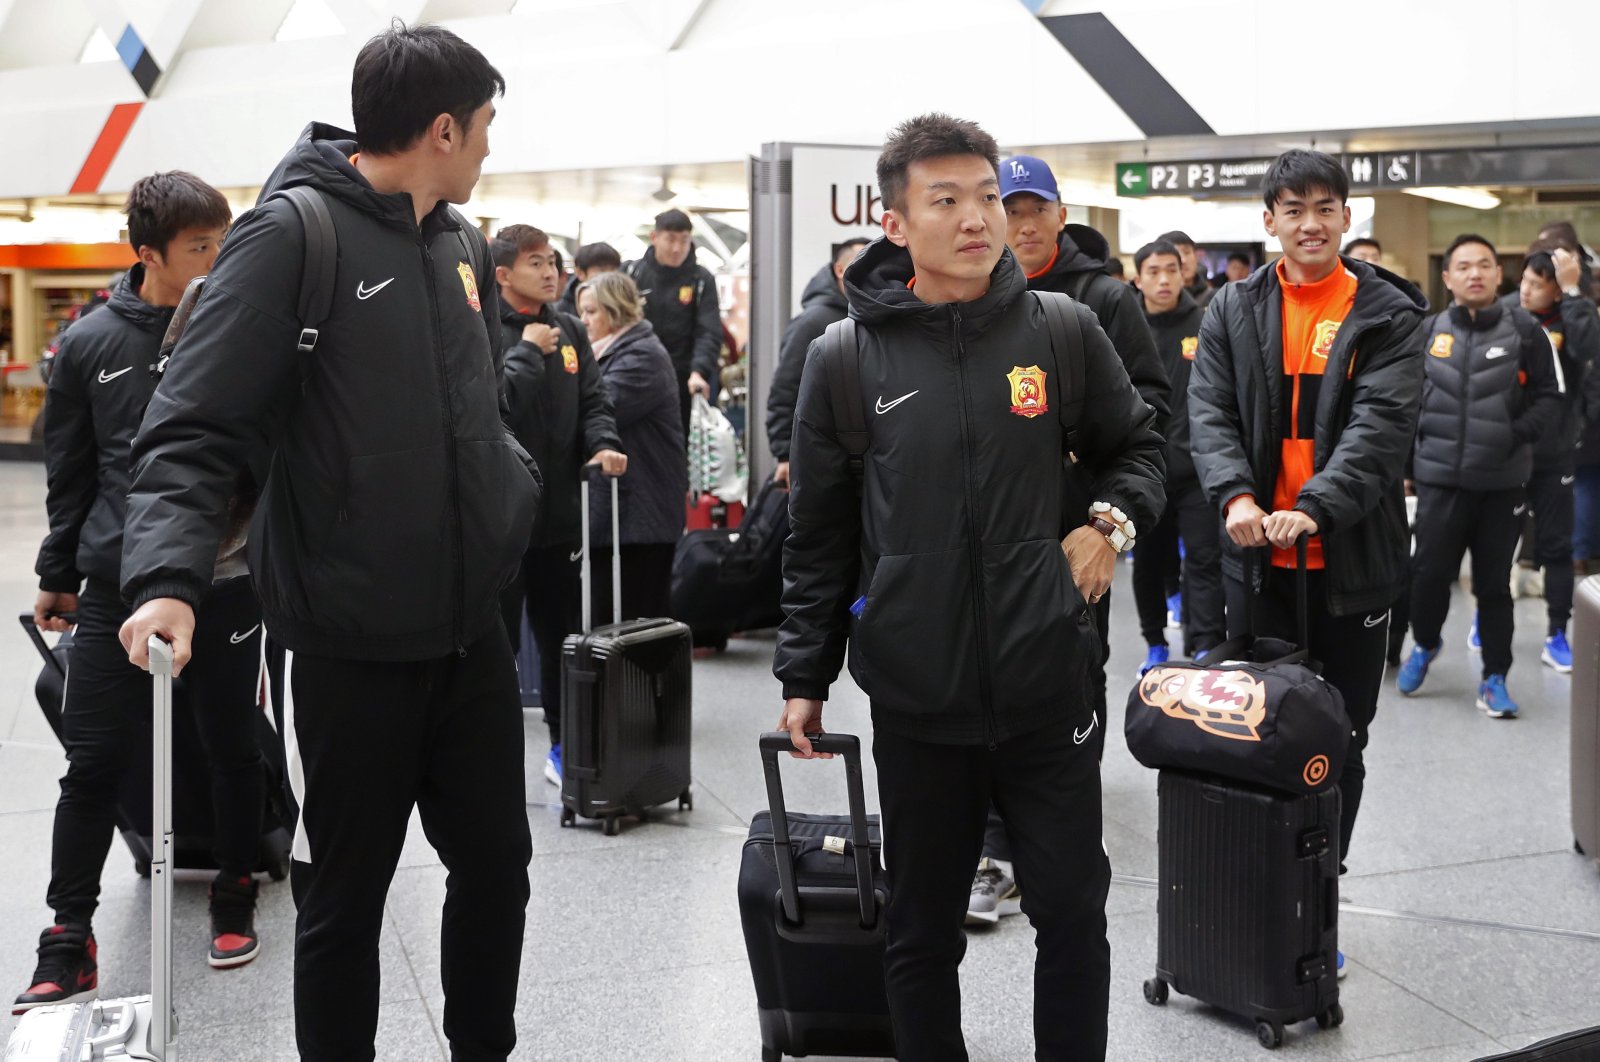 Players of the Chinese Super League team Wuhan Zall arrive at the Atocha train station in Madrid, Spain, Saturday, Feb. 29, 2020. (AP Photo)